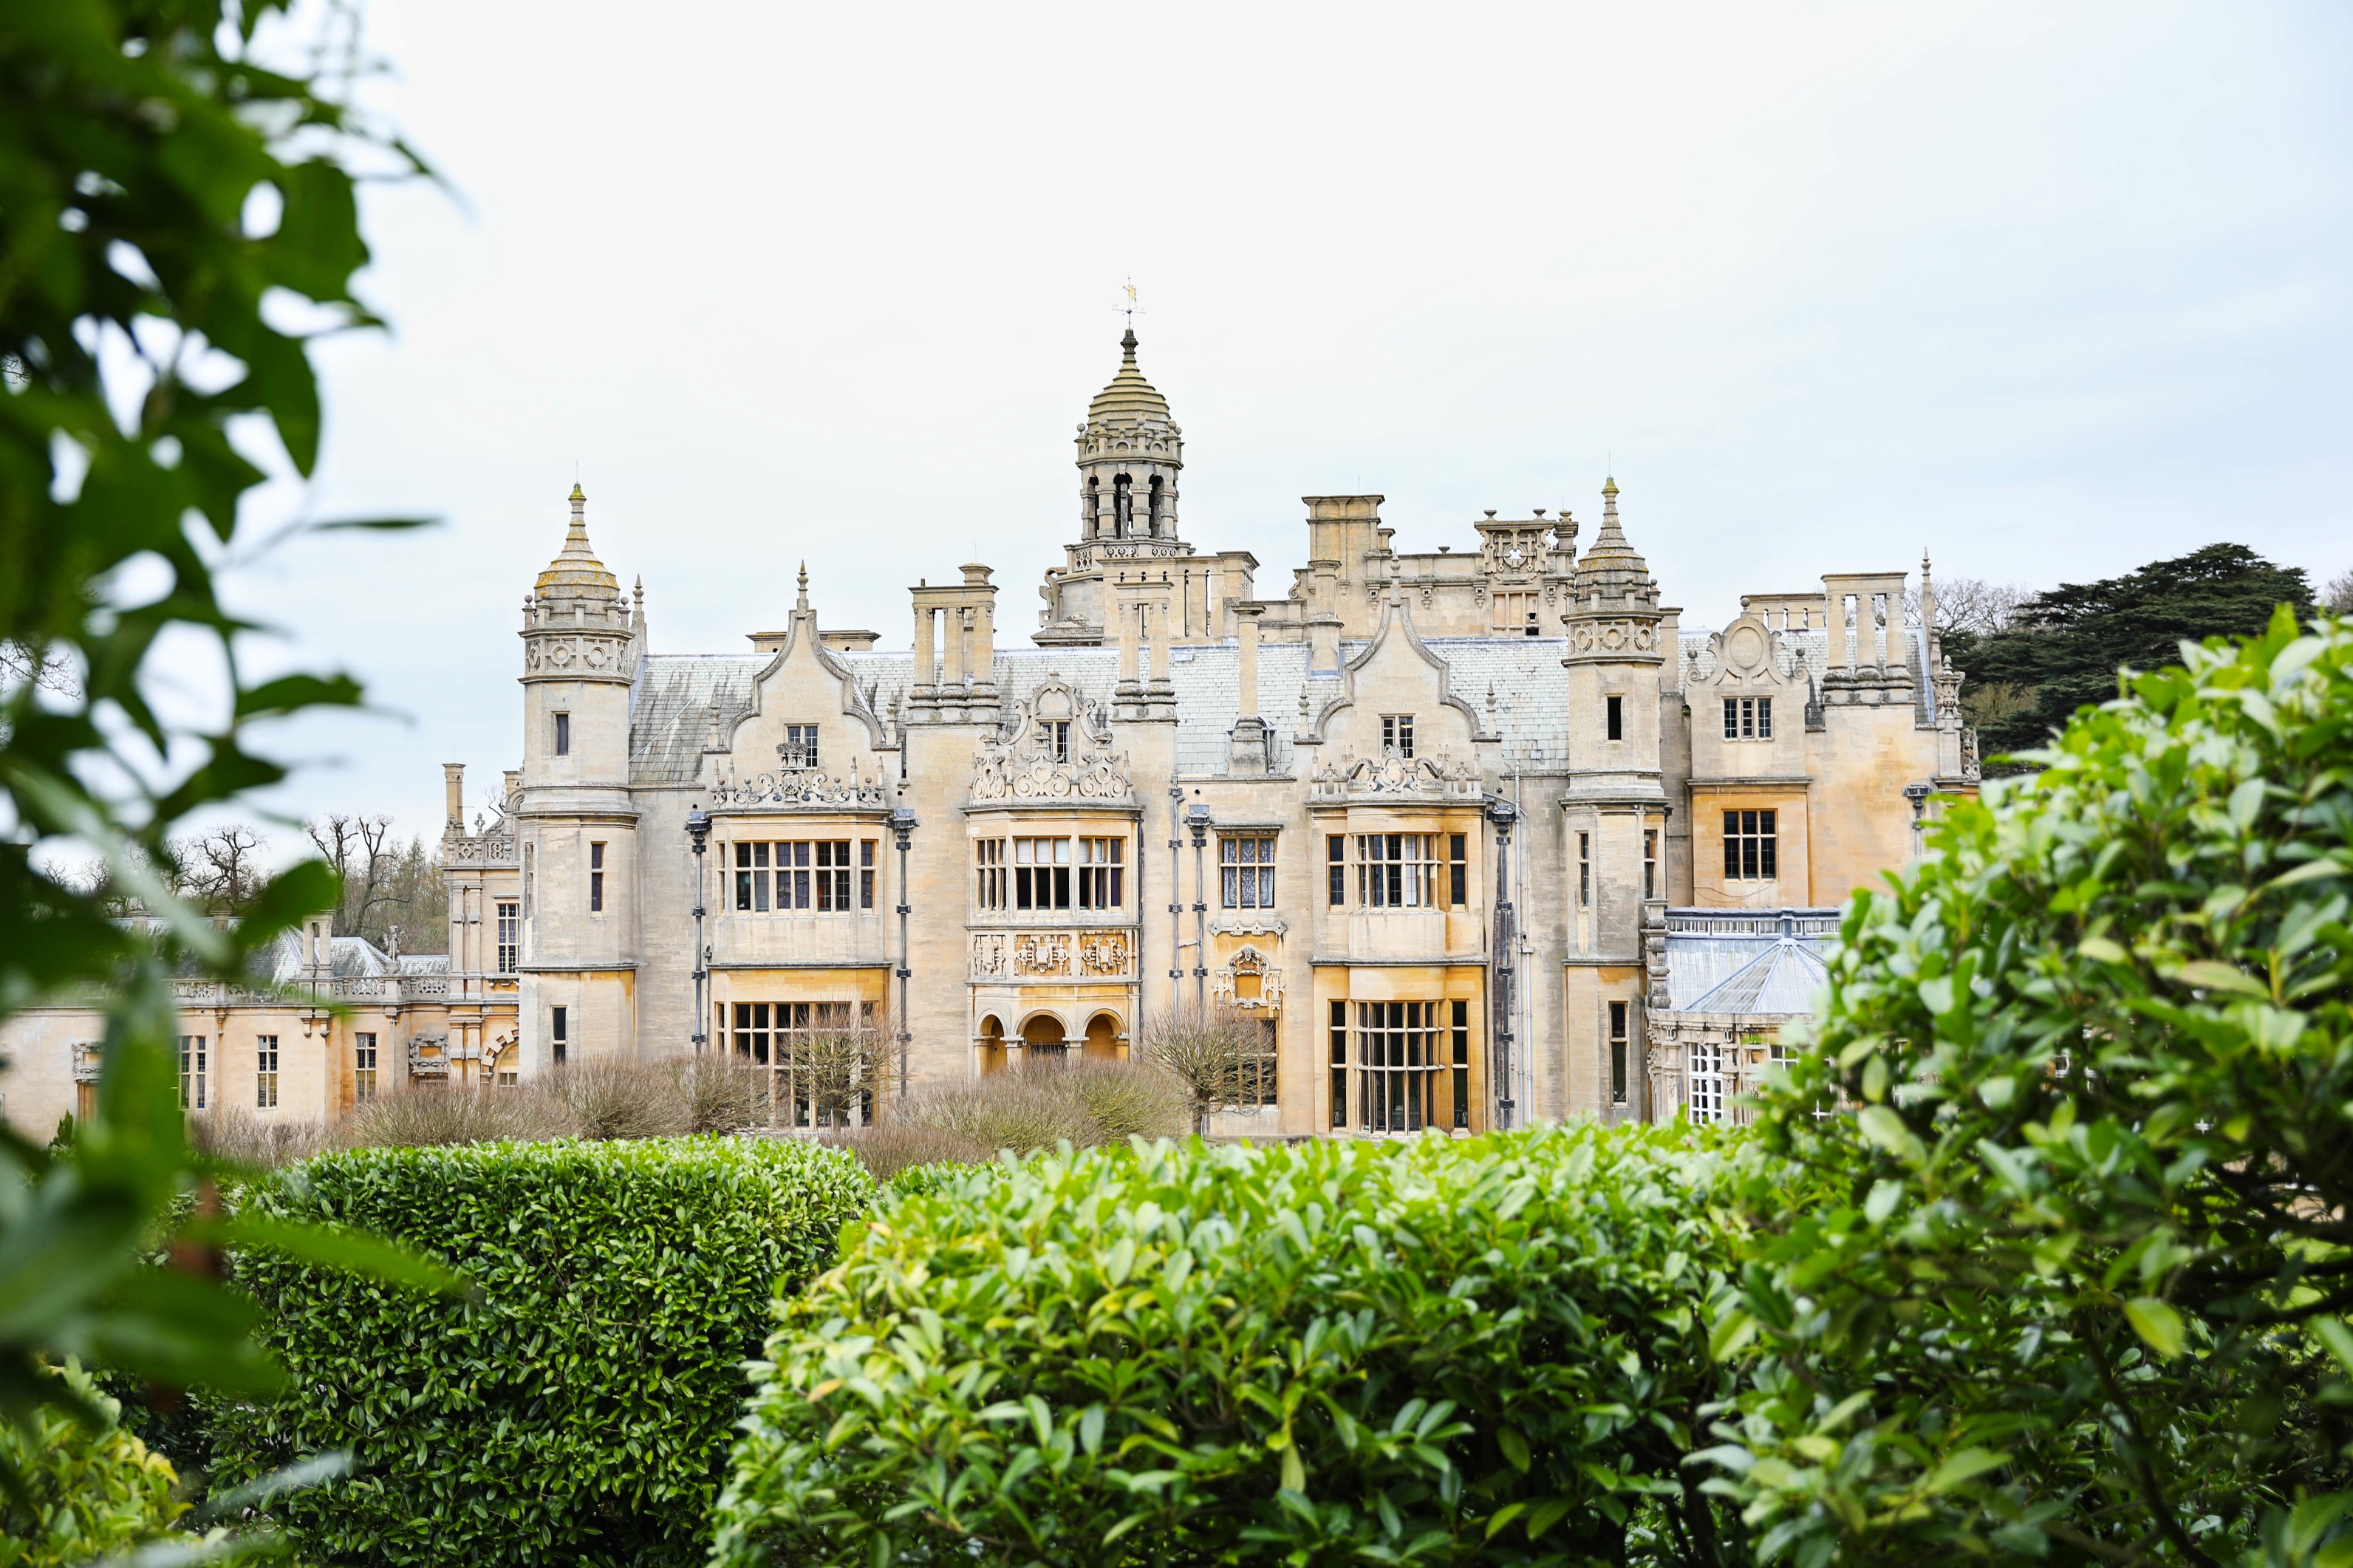 Harlaxton College in Grantham north of London! London castle you need to go visit! The prettiest castle I have ever seen! By Lauren Lindmark on dailydoseofcharm.com daily dose of charm